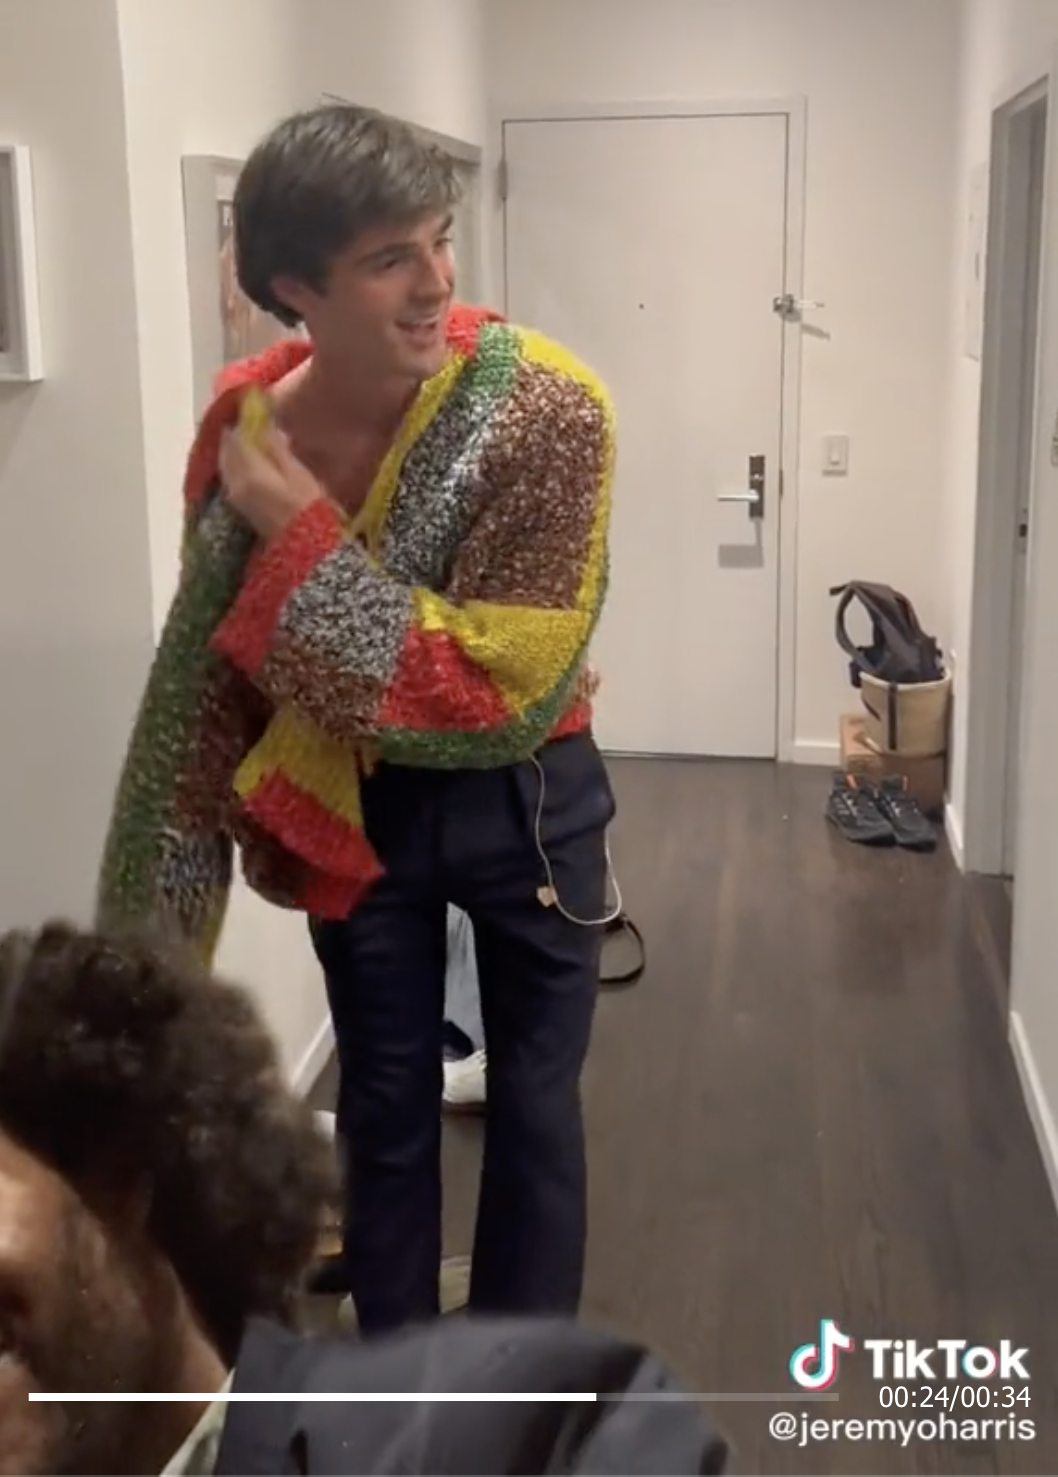 A video of Jacob Elordi dancing in a knit sweater